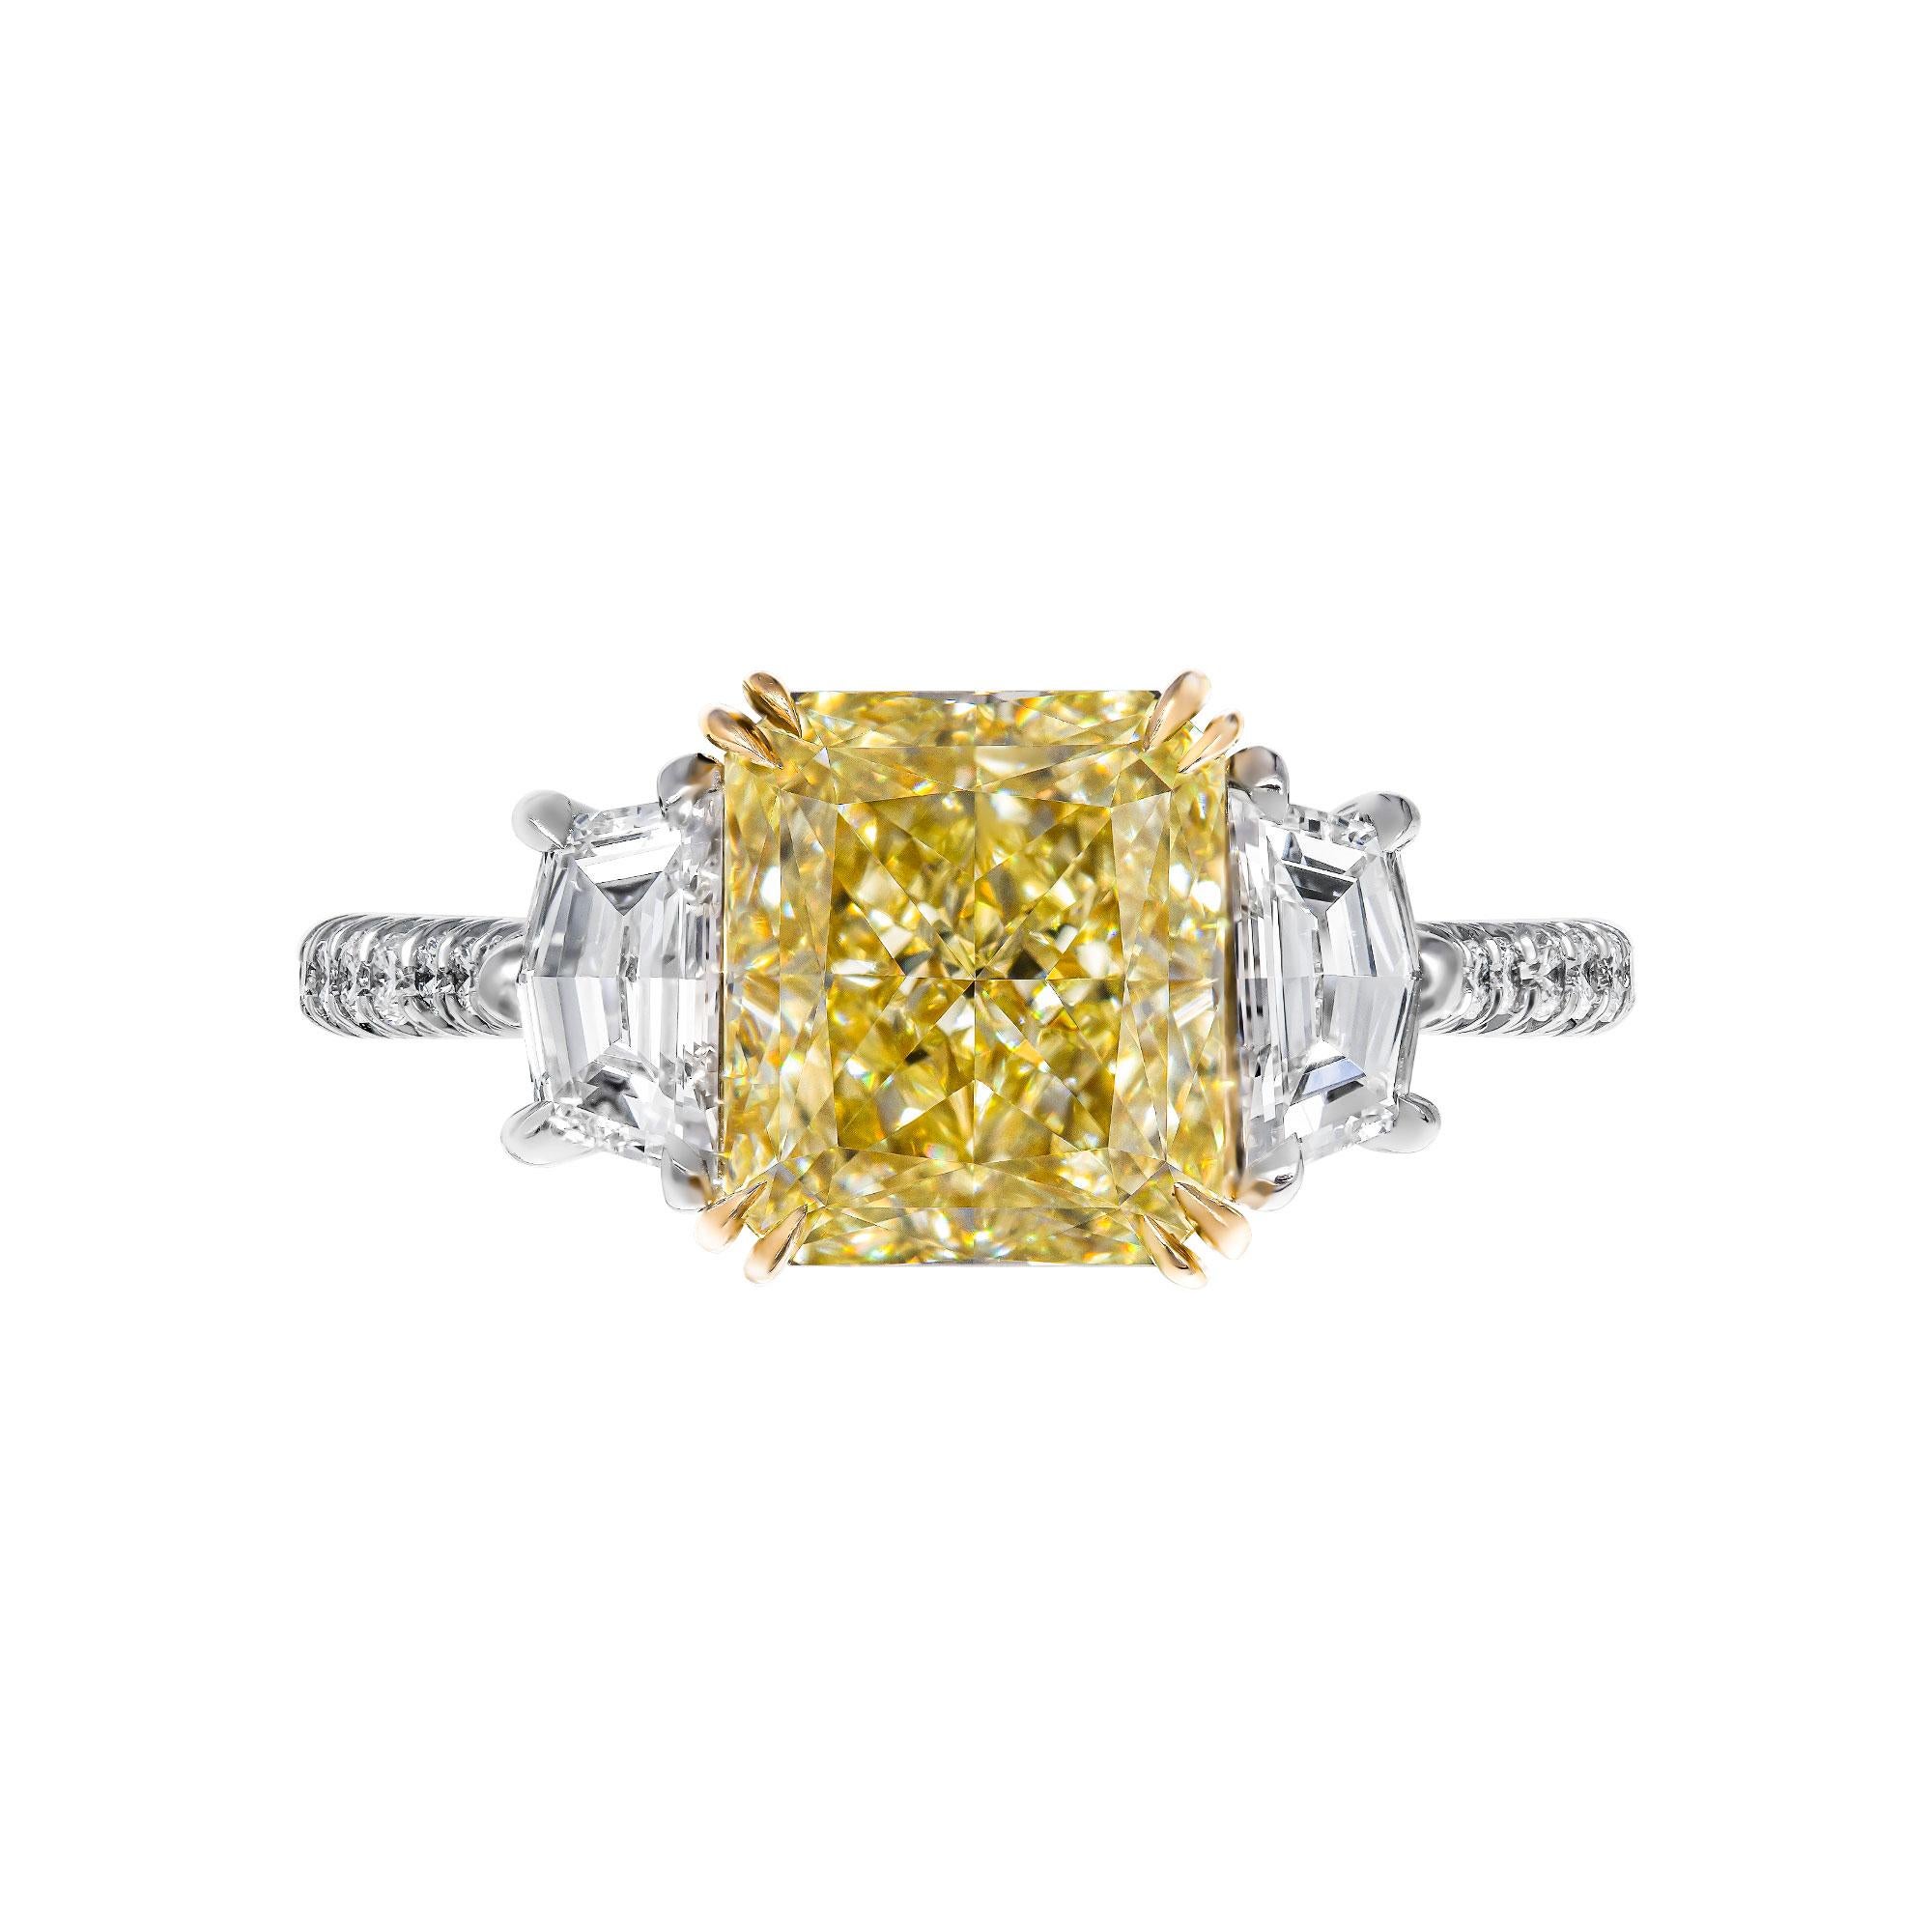 Mounted in handmade custom design setting featuring Platinum 950 & 22K Yellow Gold, diamonds on the shank and on a basket under each stone, a true piece of art

Setting features exceptional pave work, delicate yet sturdy, includes approximately